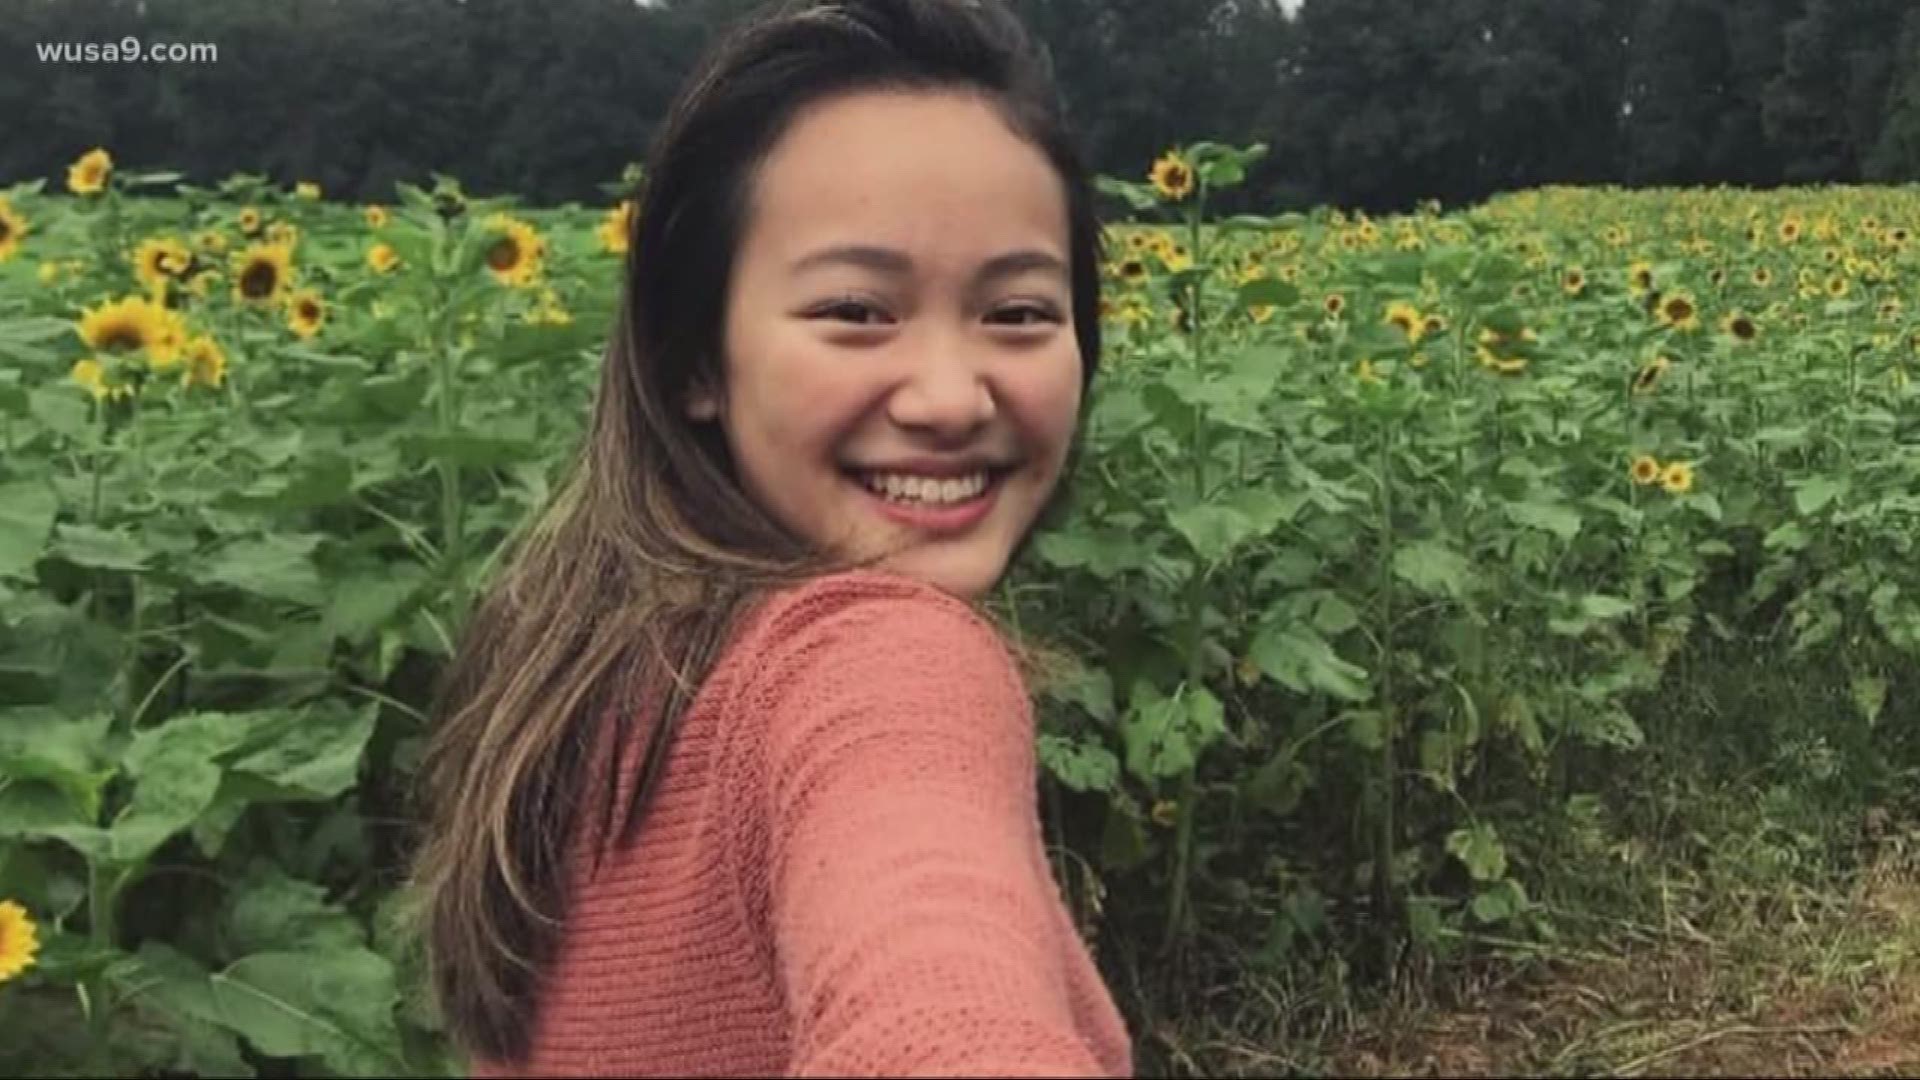 Helen Wang's smile was as bright as the sunflowers she loved so much. Her friends say they can't remember a time where they ever saw her sad or upset.

"She was everybody's favorite person," said her friend and Colonial Forge High School classmate, Rebecca Chung.